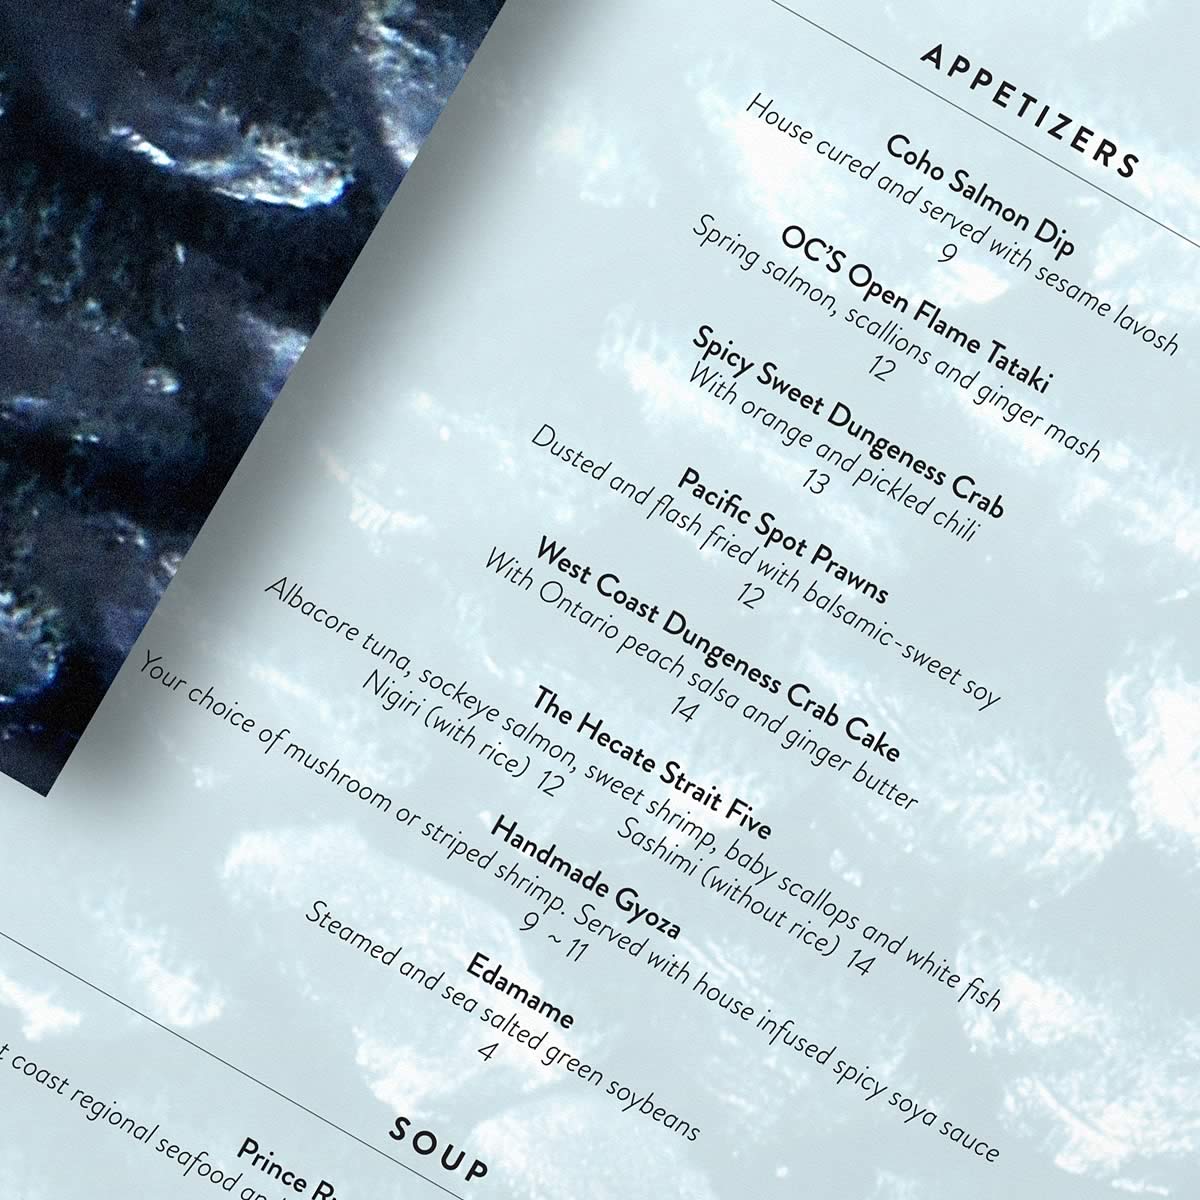 Photograph of the OC’s West Coast menu (second iteration)